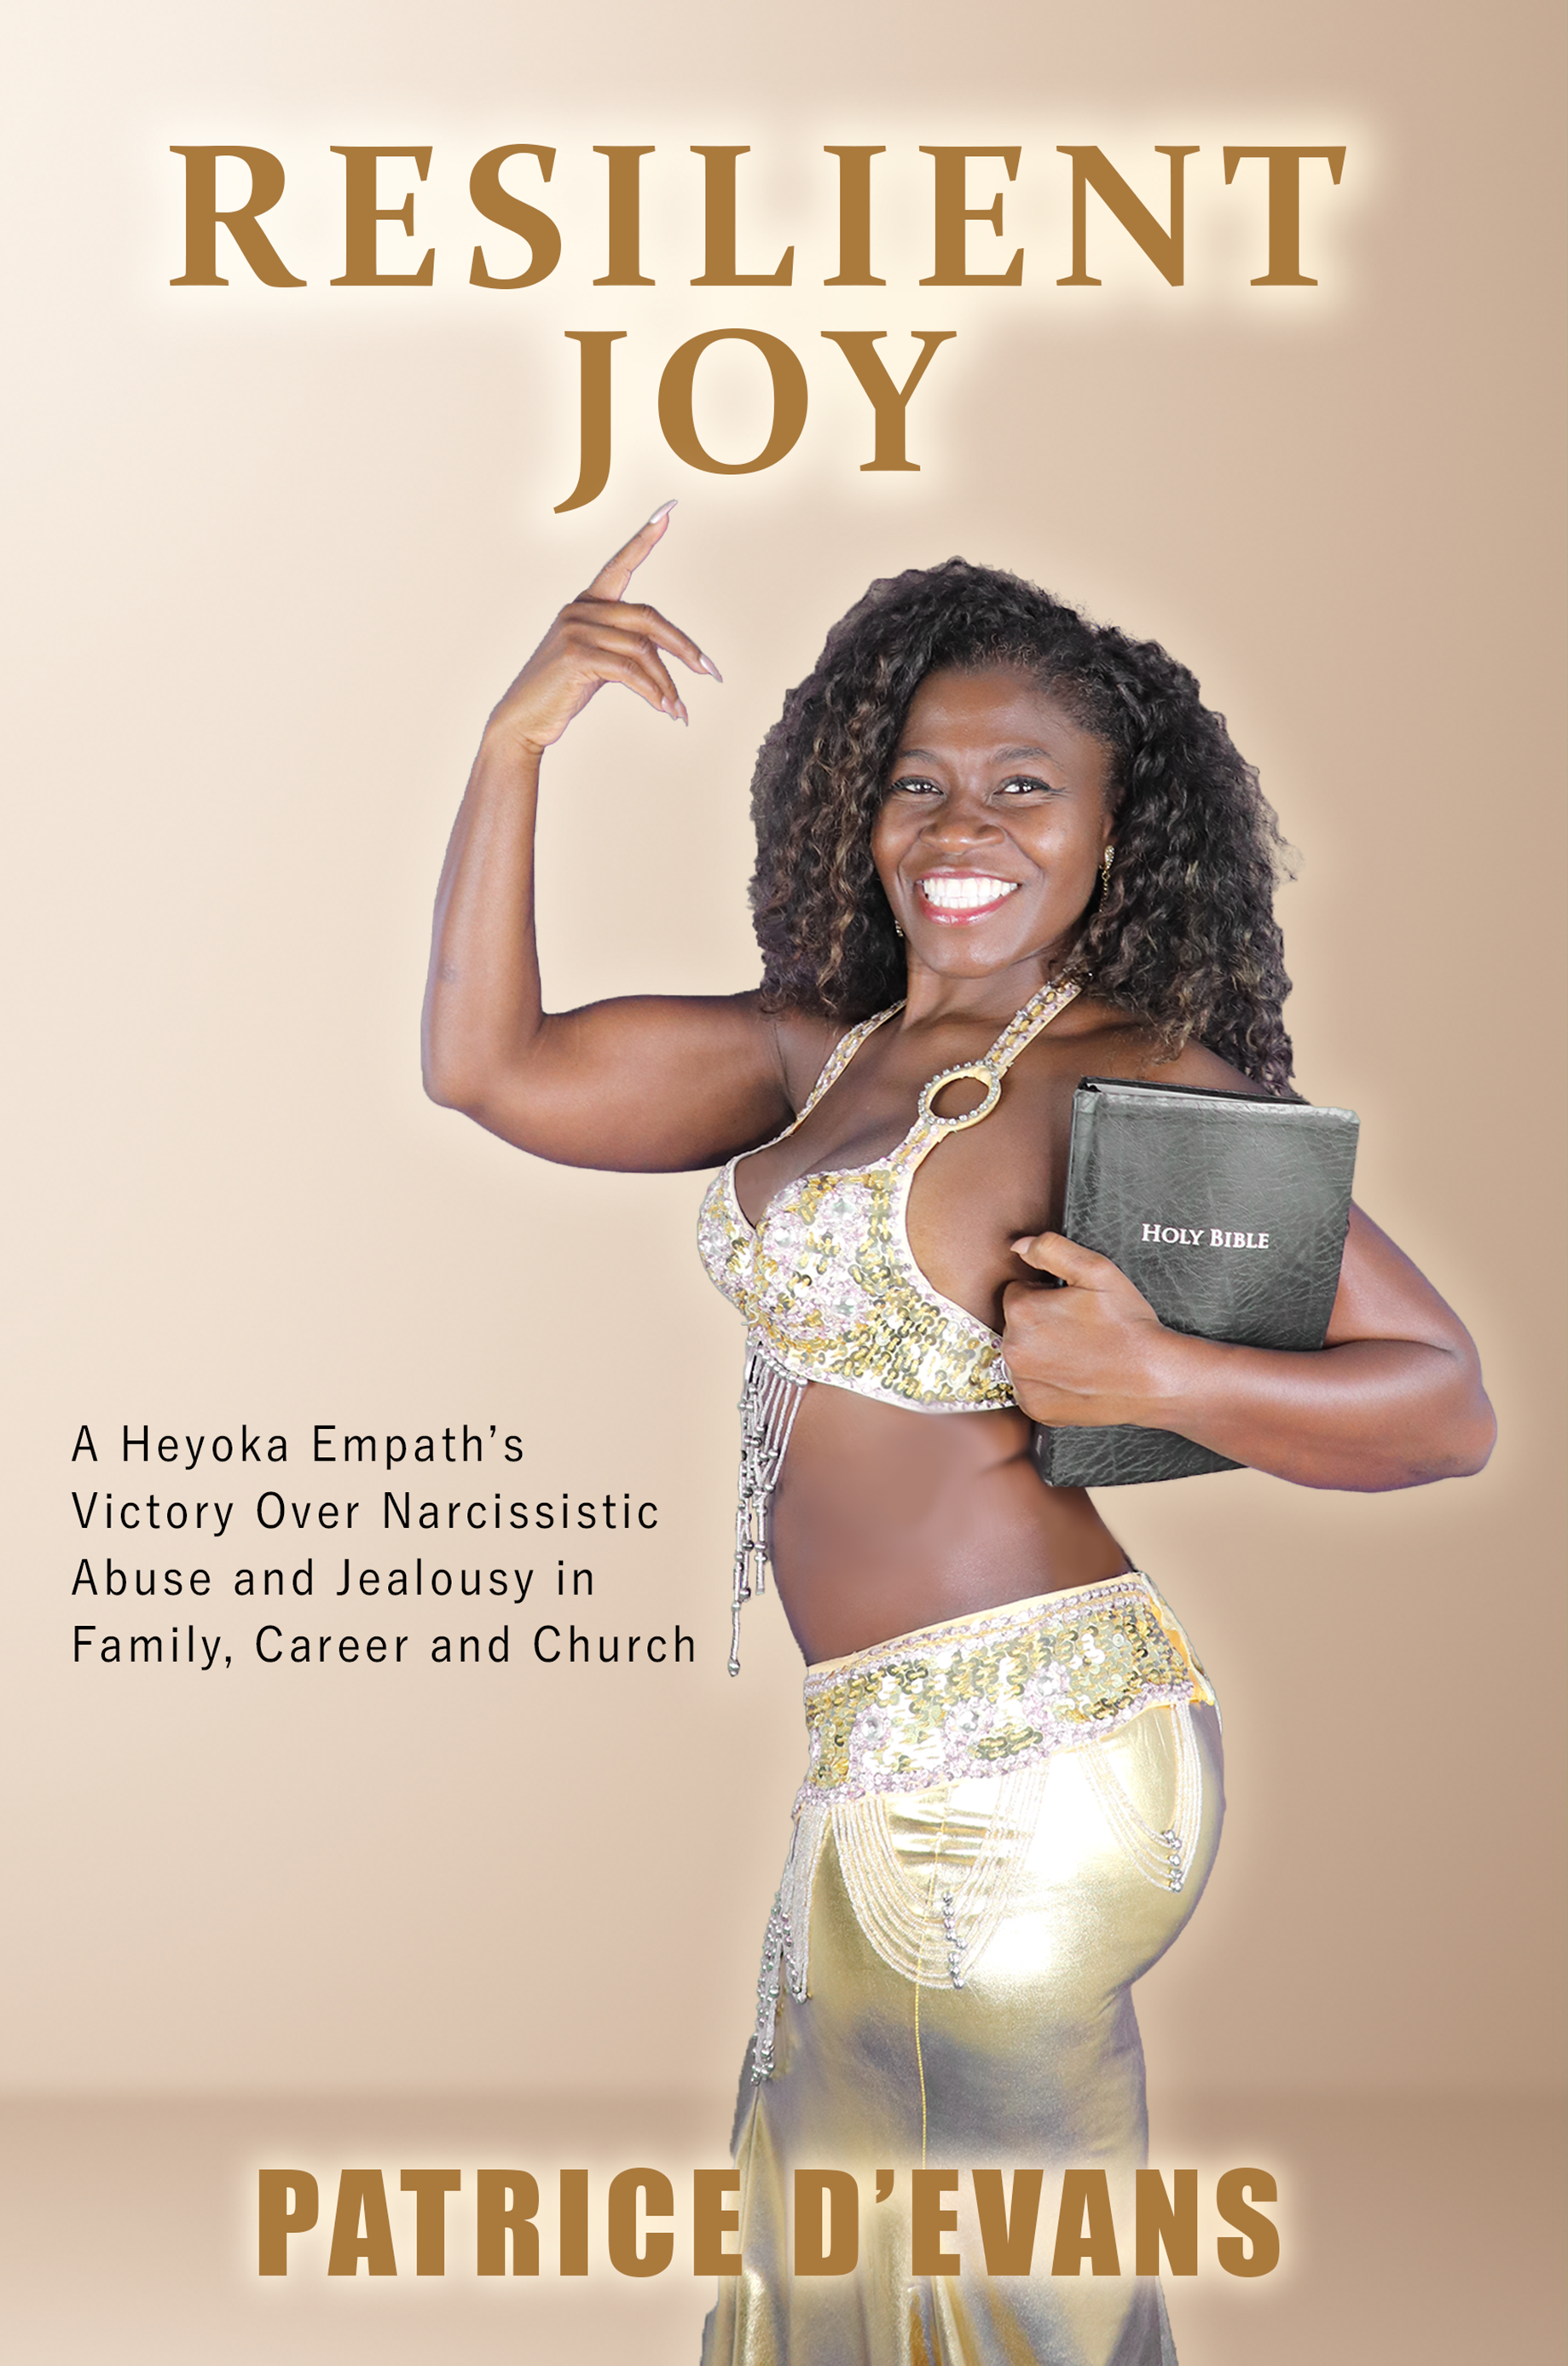 The Cure for Narcissism? Evangelist and Heyoka Empath Patrice D’Evans Shares Victory Over Narcissism and Abuse in Her New Book: "Resilient Joy"